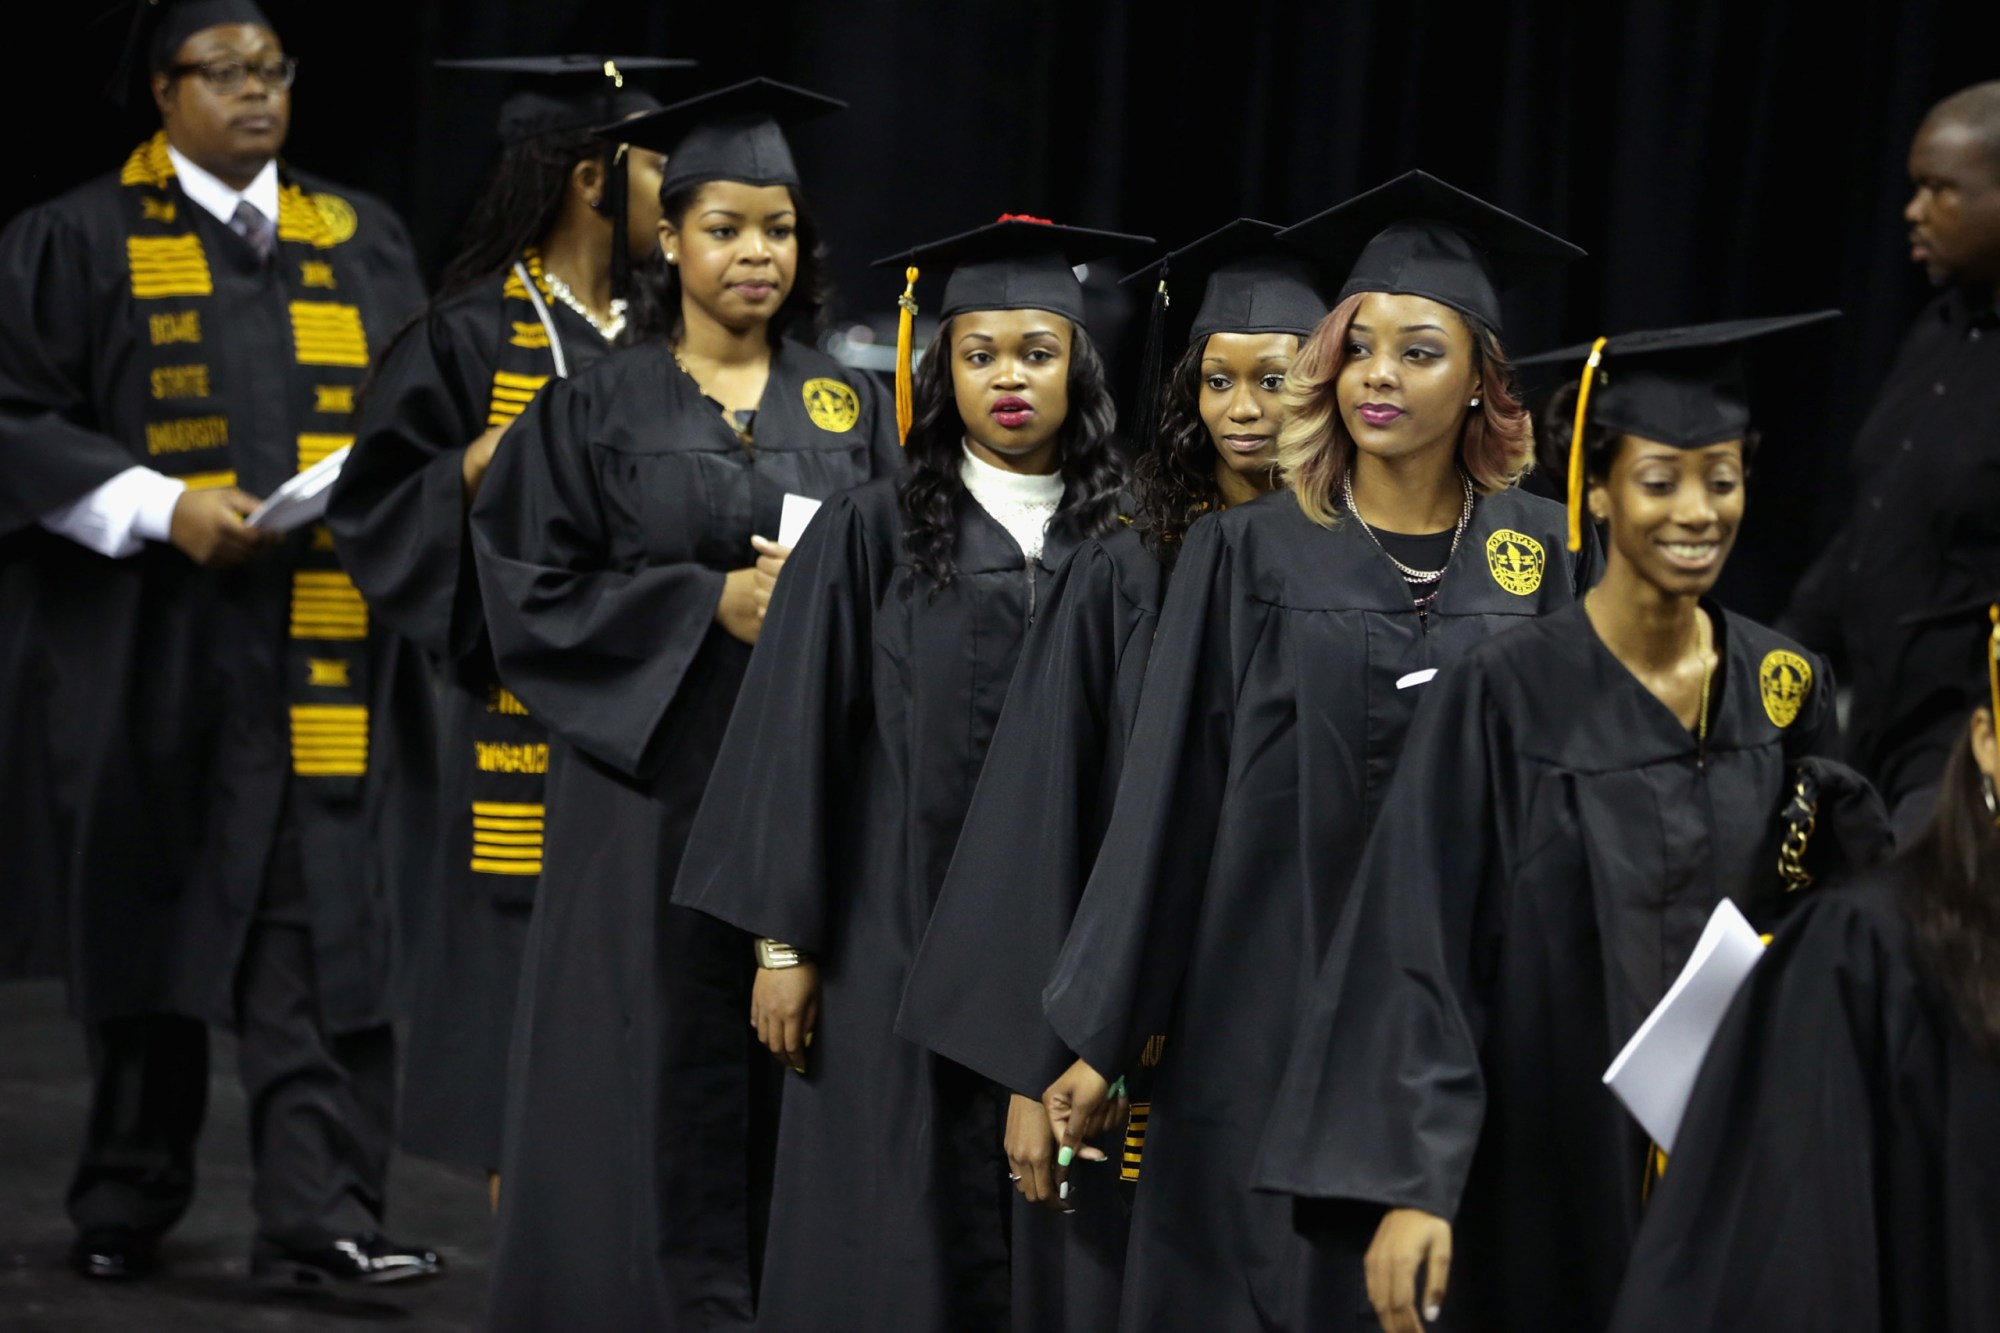 COLLEGE PARK, MD - MAY 17:  Graduates of Bowie State University arrive for the school's graduation ceremony at the Comcast Center on the campus of the University of Maryland May 17, 2013 in College Park, Maryland. First lady Michelle Obama delivered the commencement speech for the 600 graduates of Maryland's oldest historically black university and one of the ten oldest in the country.  (Photo by Chip Somodevilla/Getty Images)